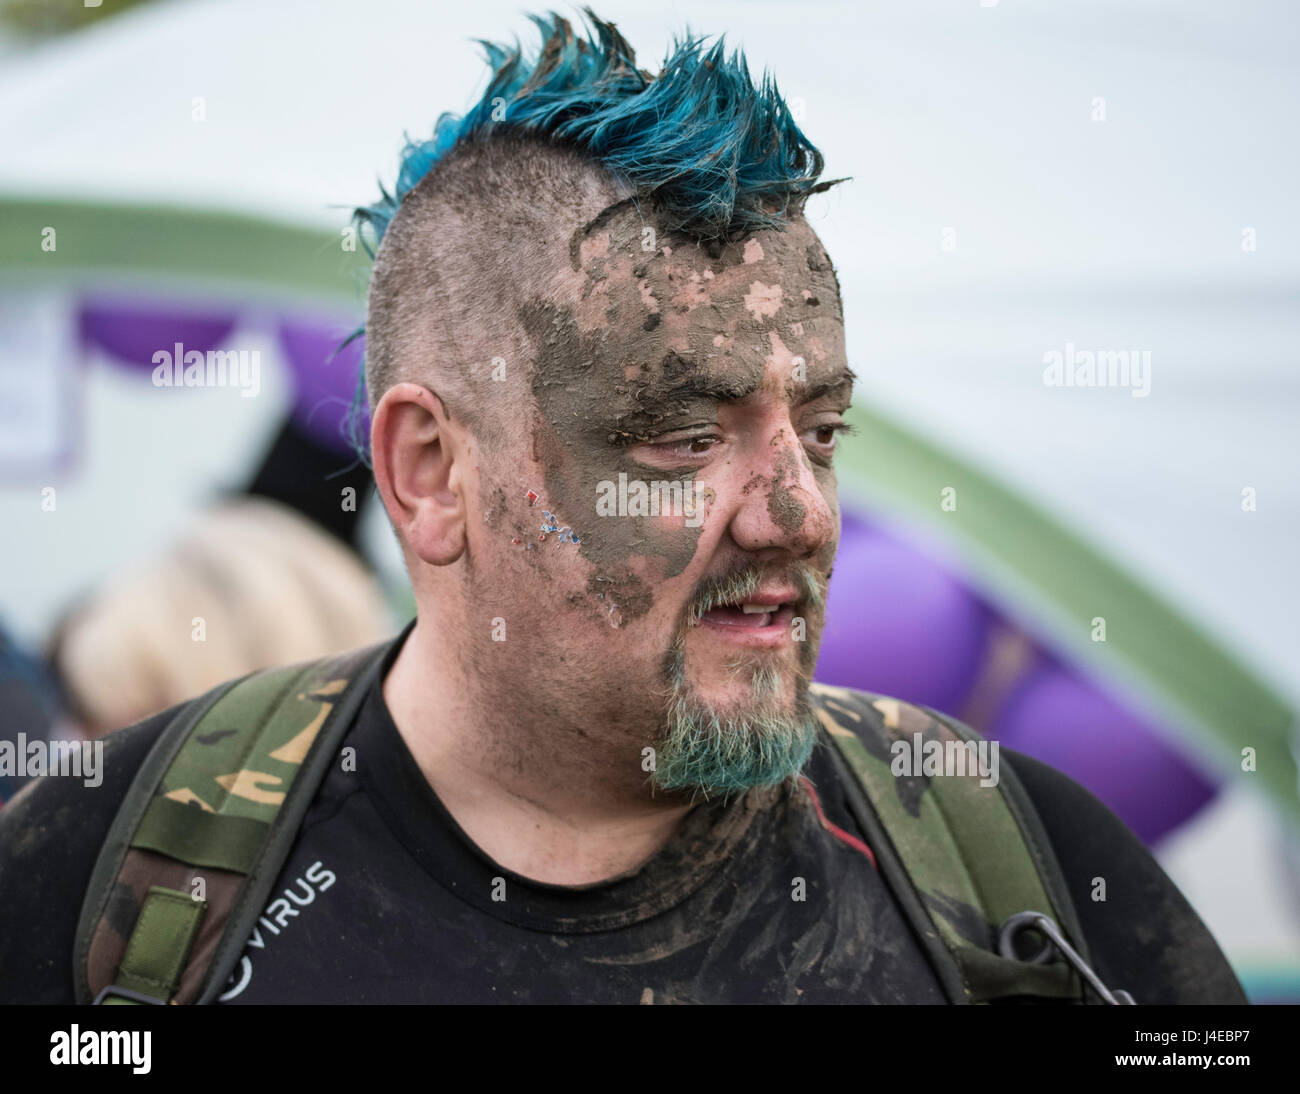 Brentwood, Essex, 13th May 2017; Participant   at the, Nuclear Blast race, Brentwood, Essex Credit: Ian Davidson/Alamy Live News Stock Photo